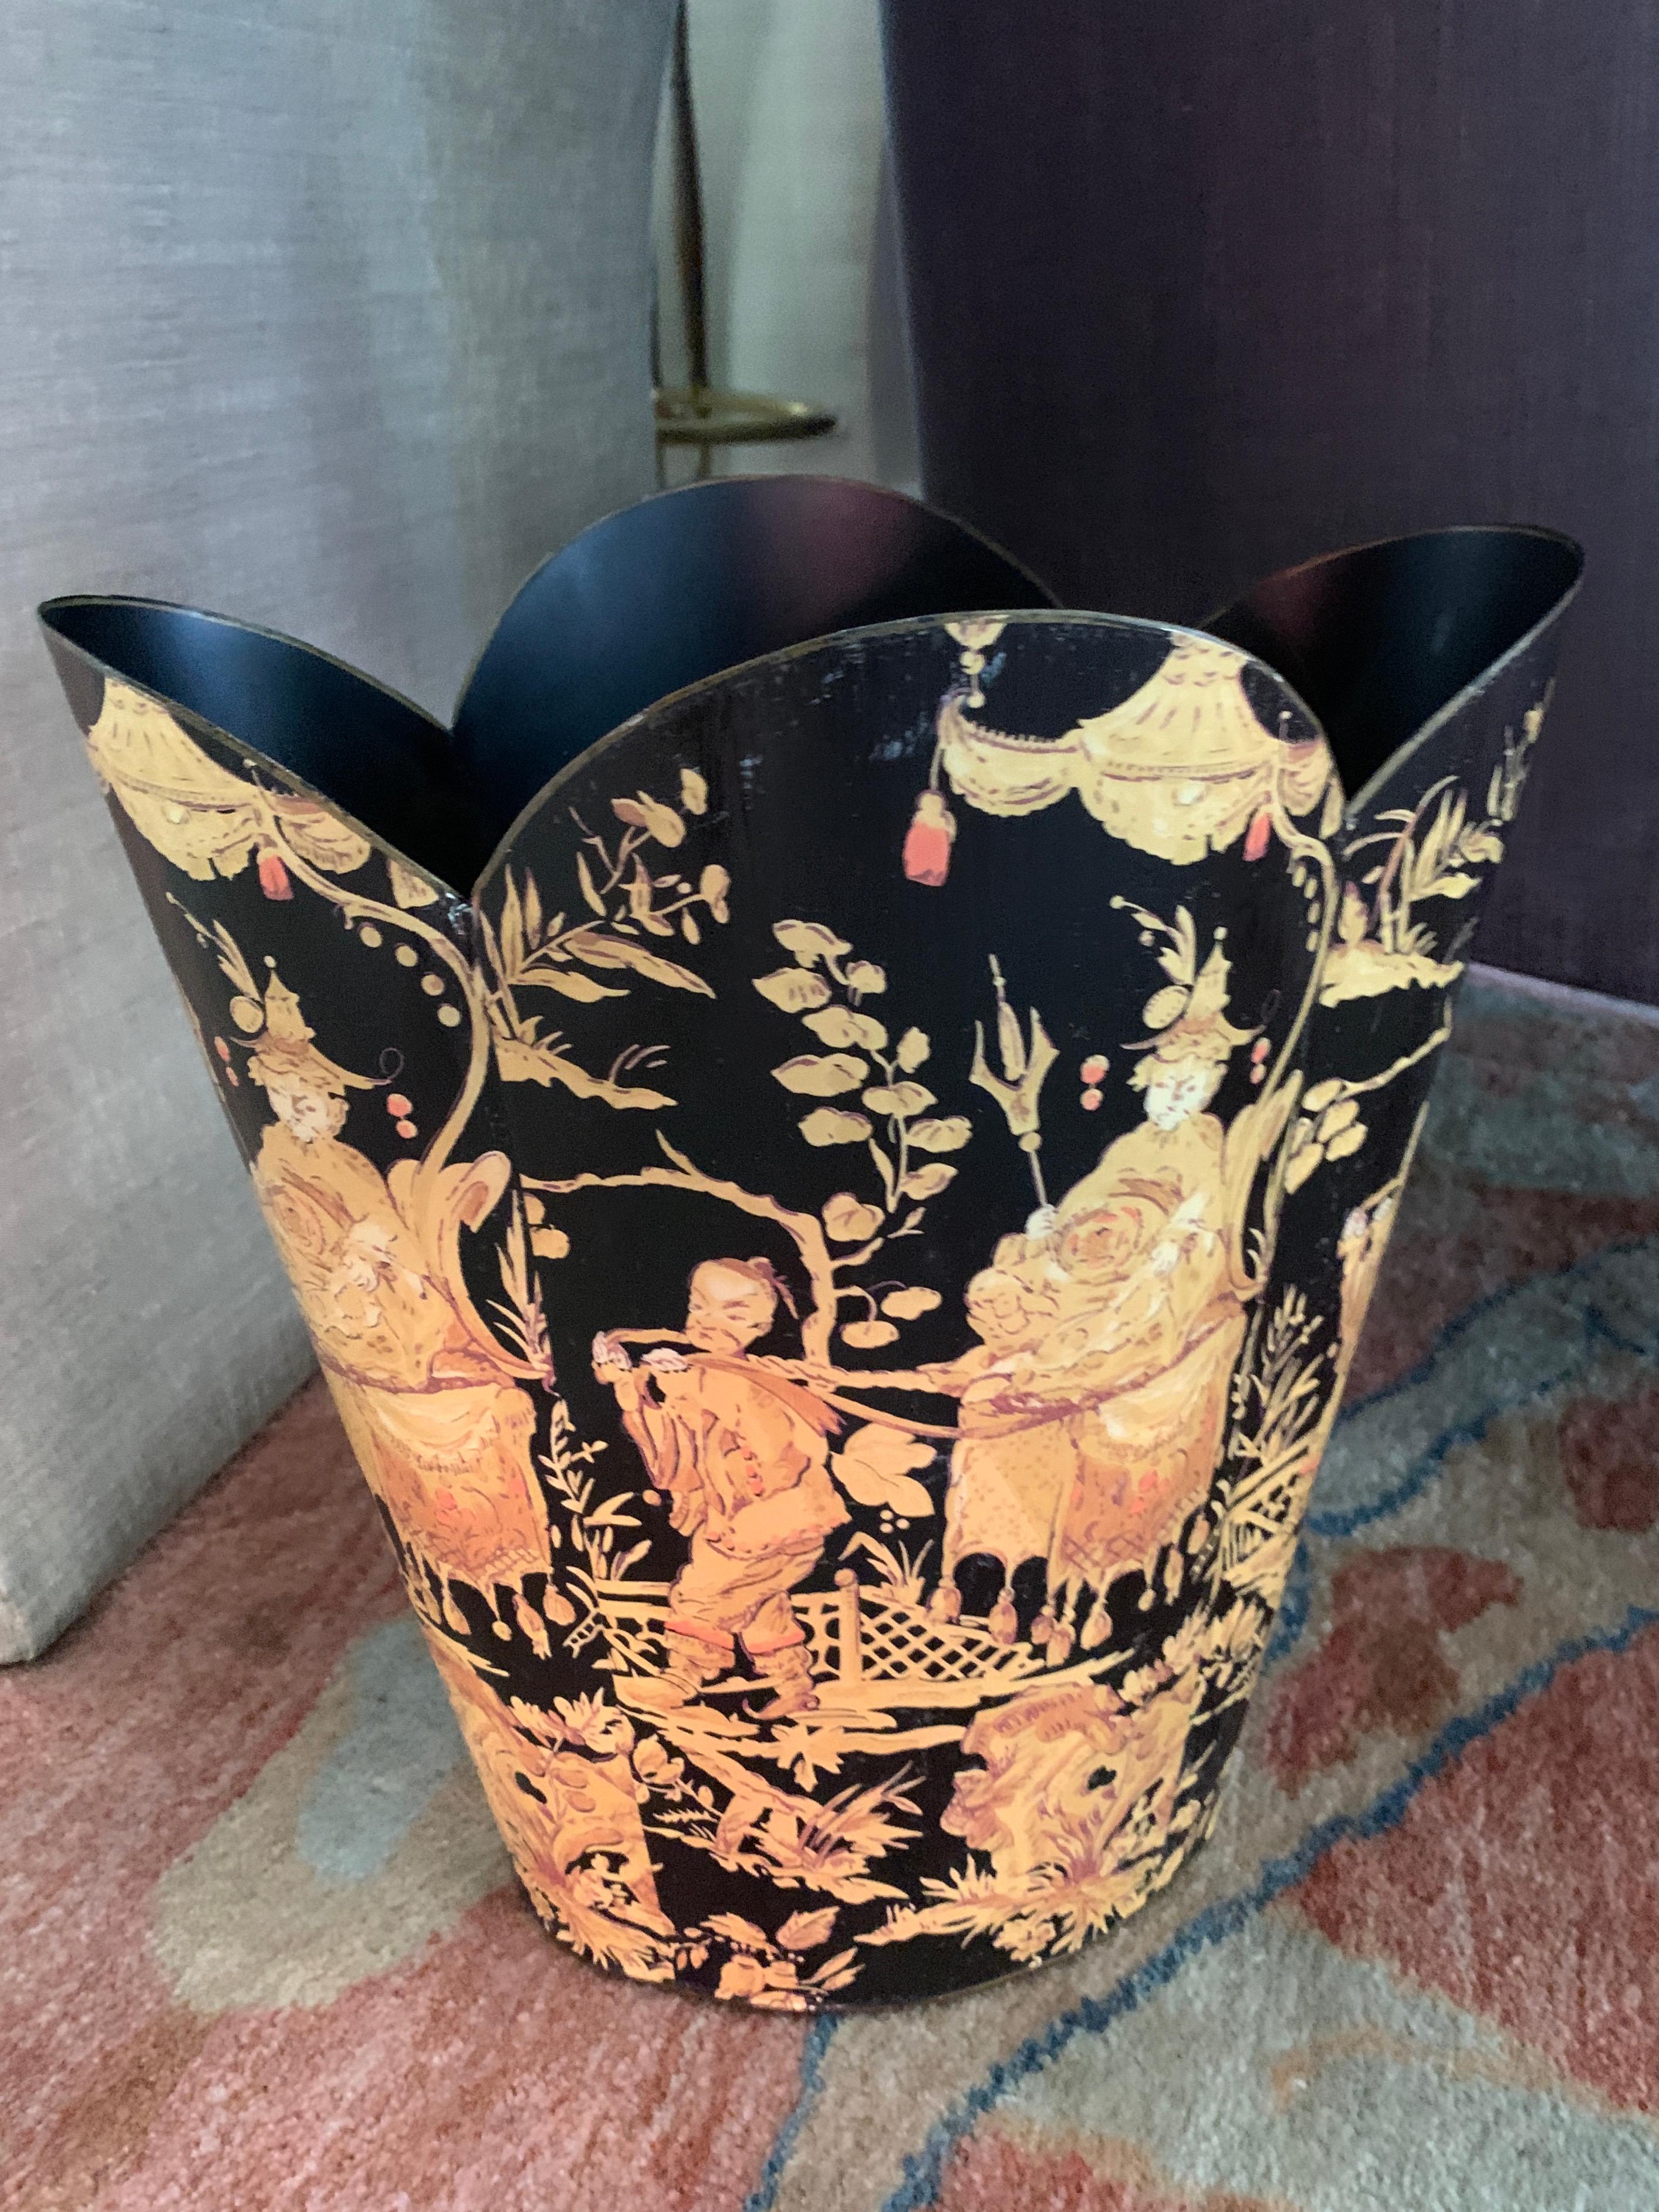 A wonderful Waste or Trash can. The scallop top metal can is covered by decoupage of an asian motif in gold or cream on a black field. A compliment to any room, from the bedroom, bath or office and guest house - a handsome and sophisticated piece.